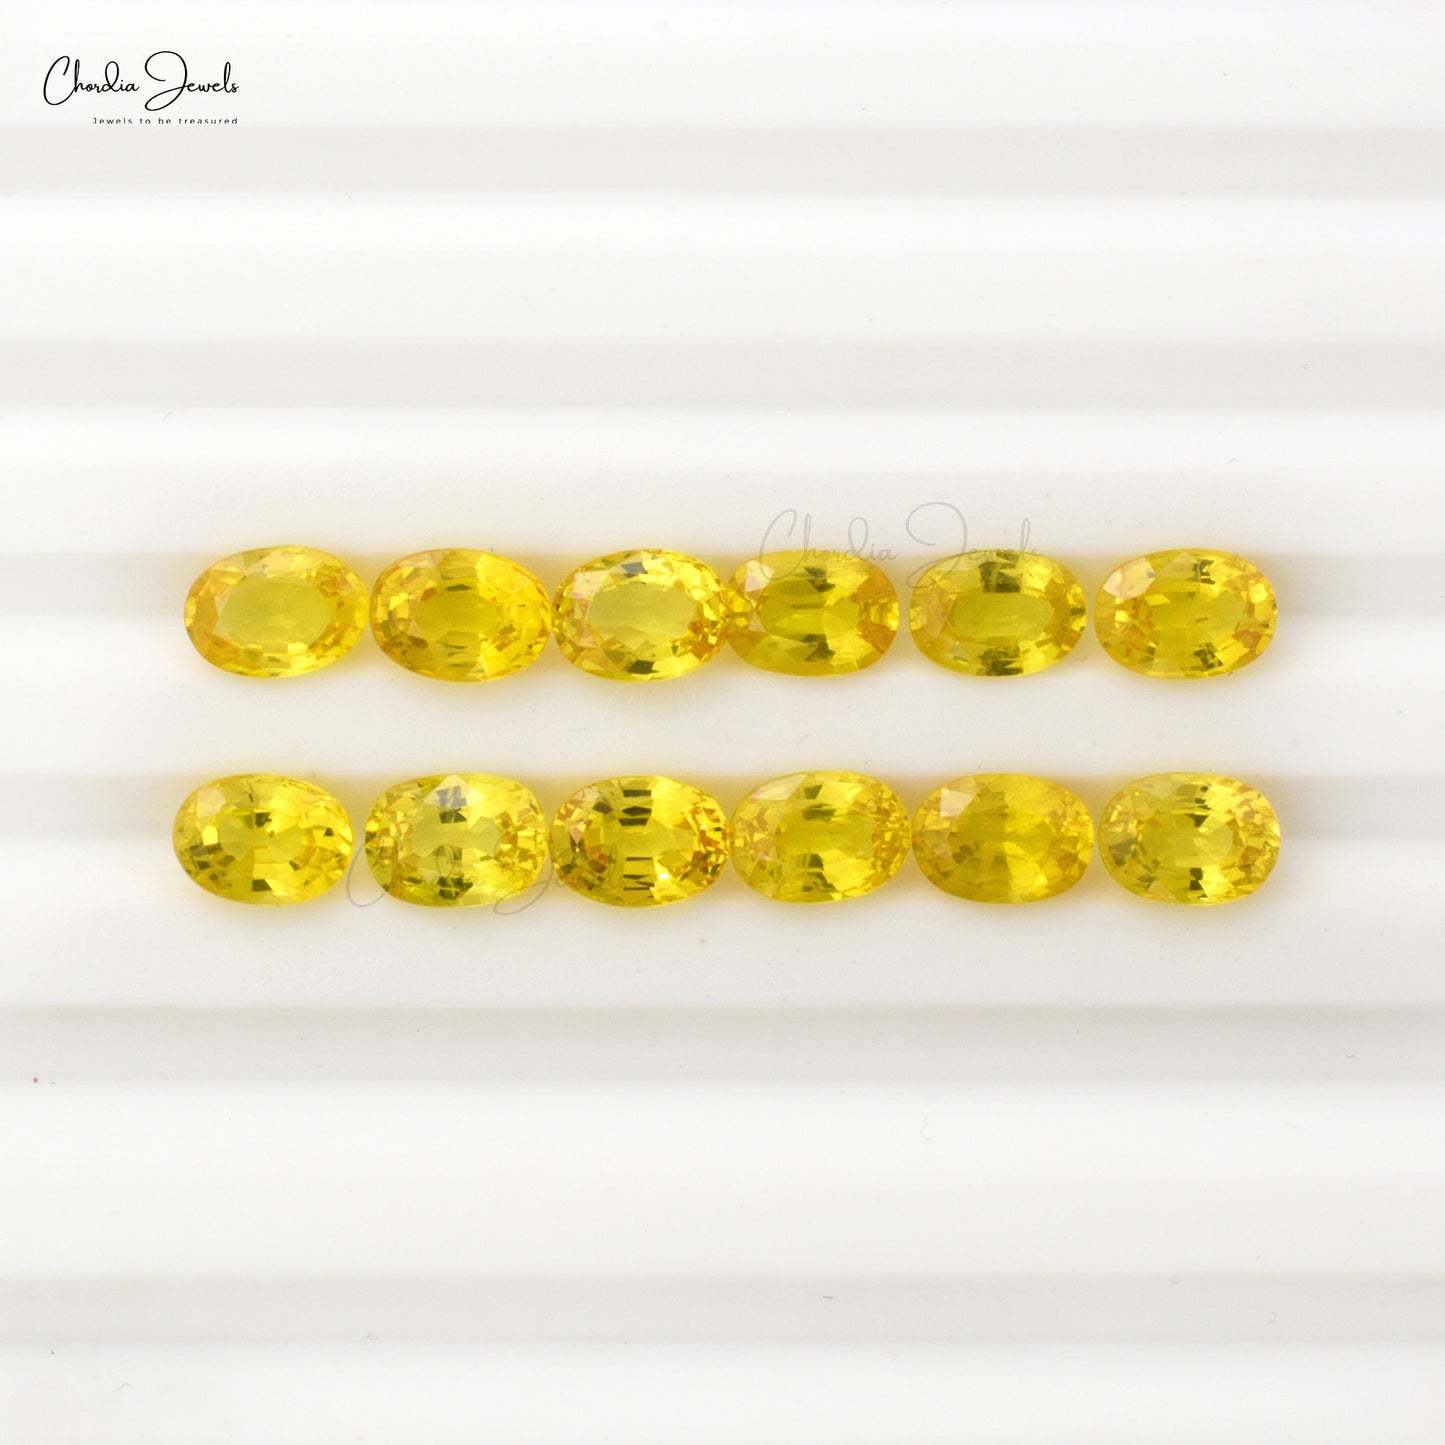 Genuine Yellow Sapphire Loose Gemstones 5x3mm Oval-Cut. Weight: 0.27 Carats, Stone Cut: Excellent, Precious Gemstones from Chordia Jewels